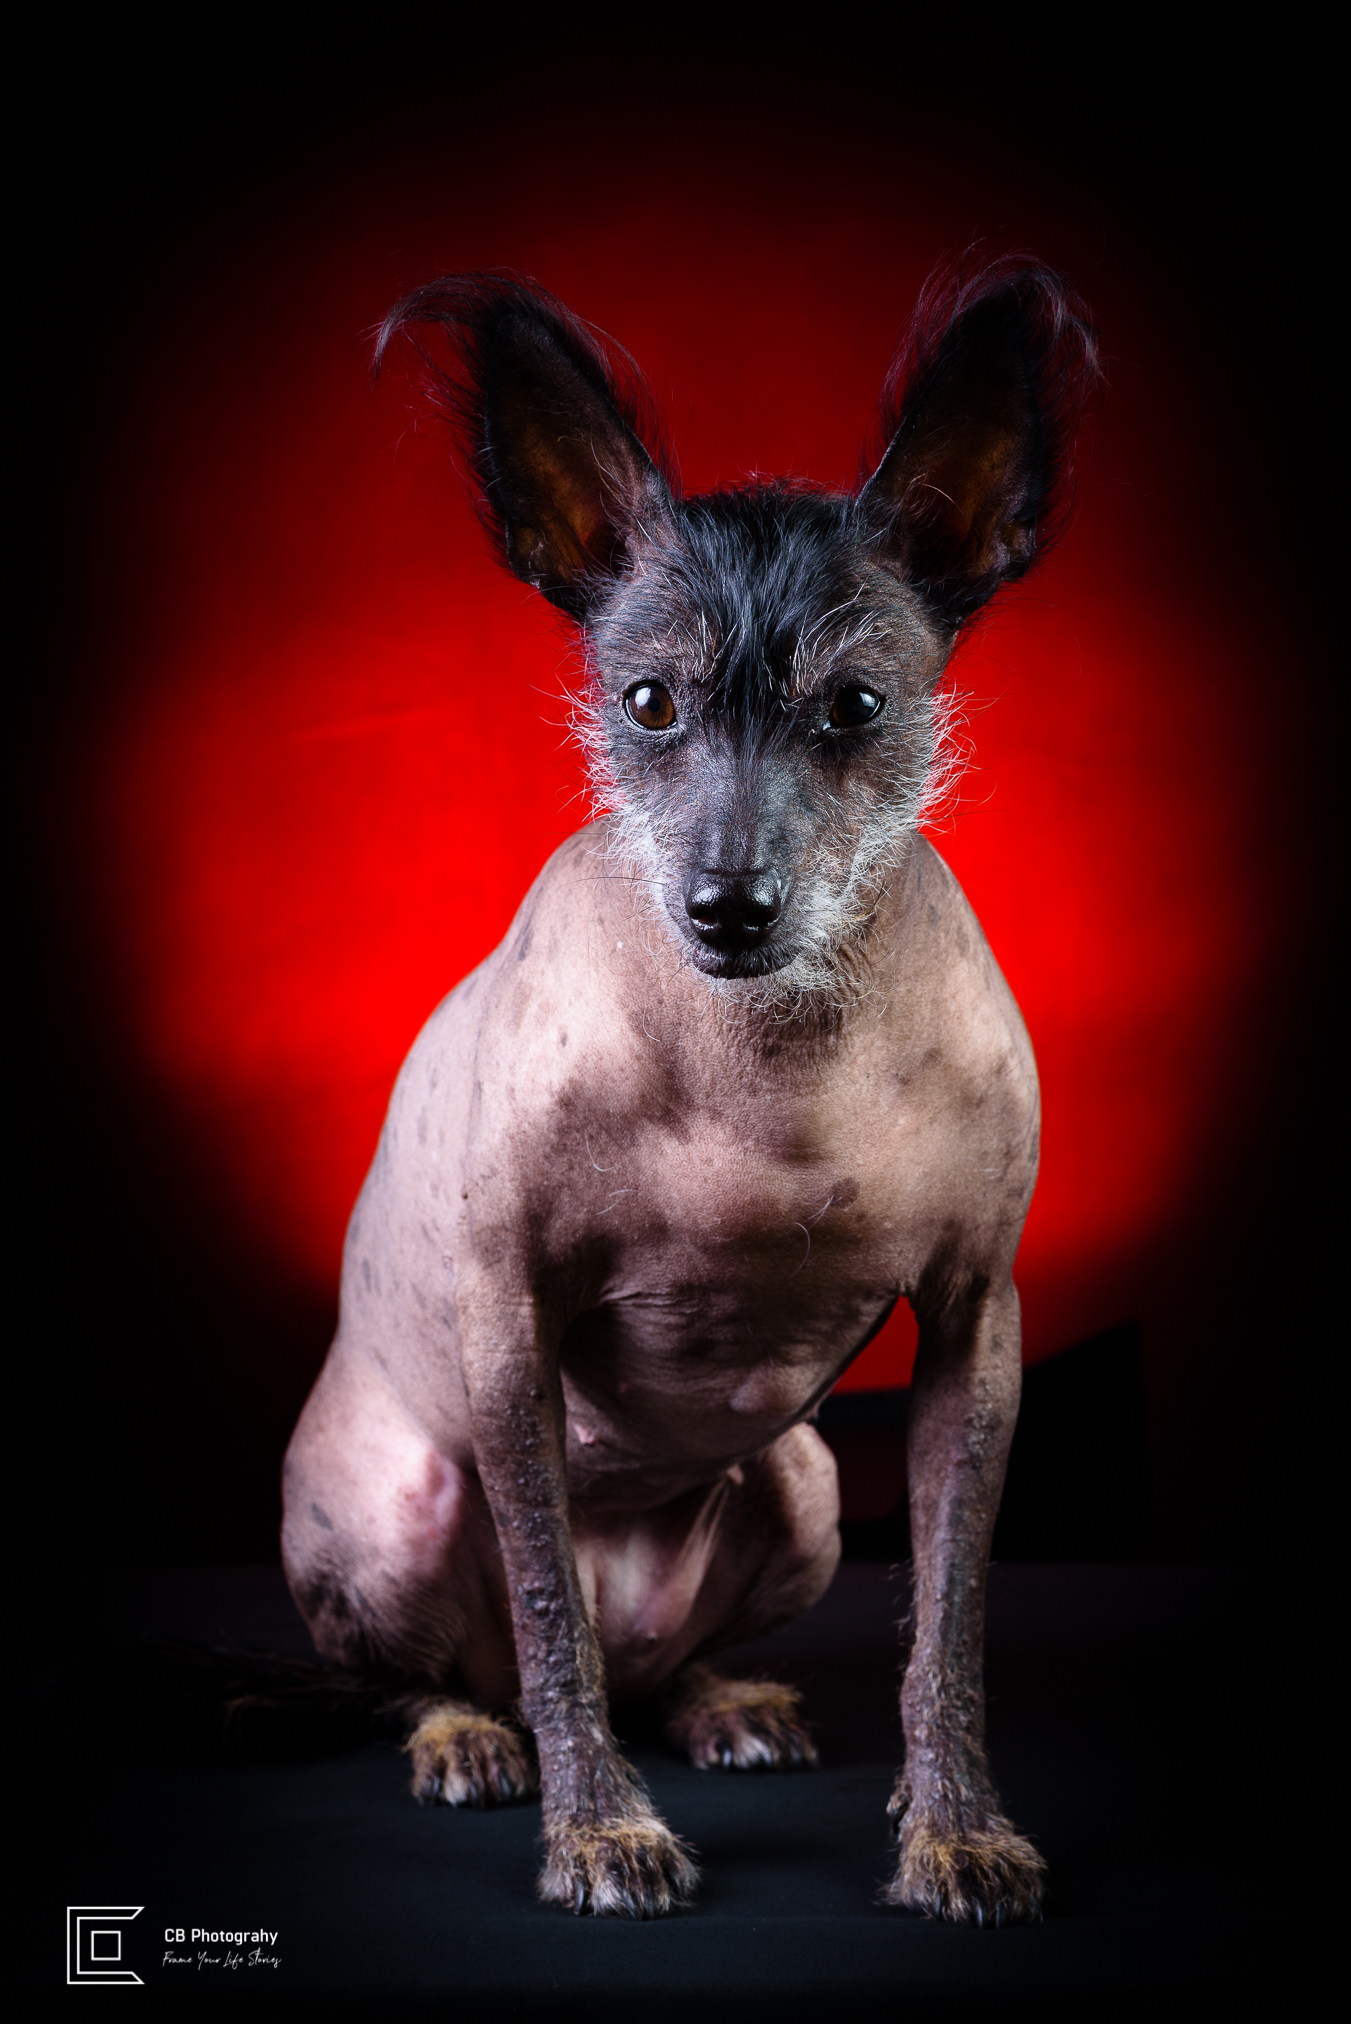 Pet photography in the studio, female Xoloitzcuintli-know as Mexican Naked Dog, using a red light background, image by Bonifacio Global City Photographer Cristian Bucur